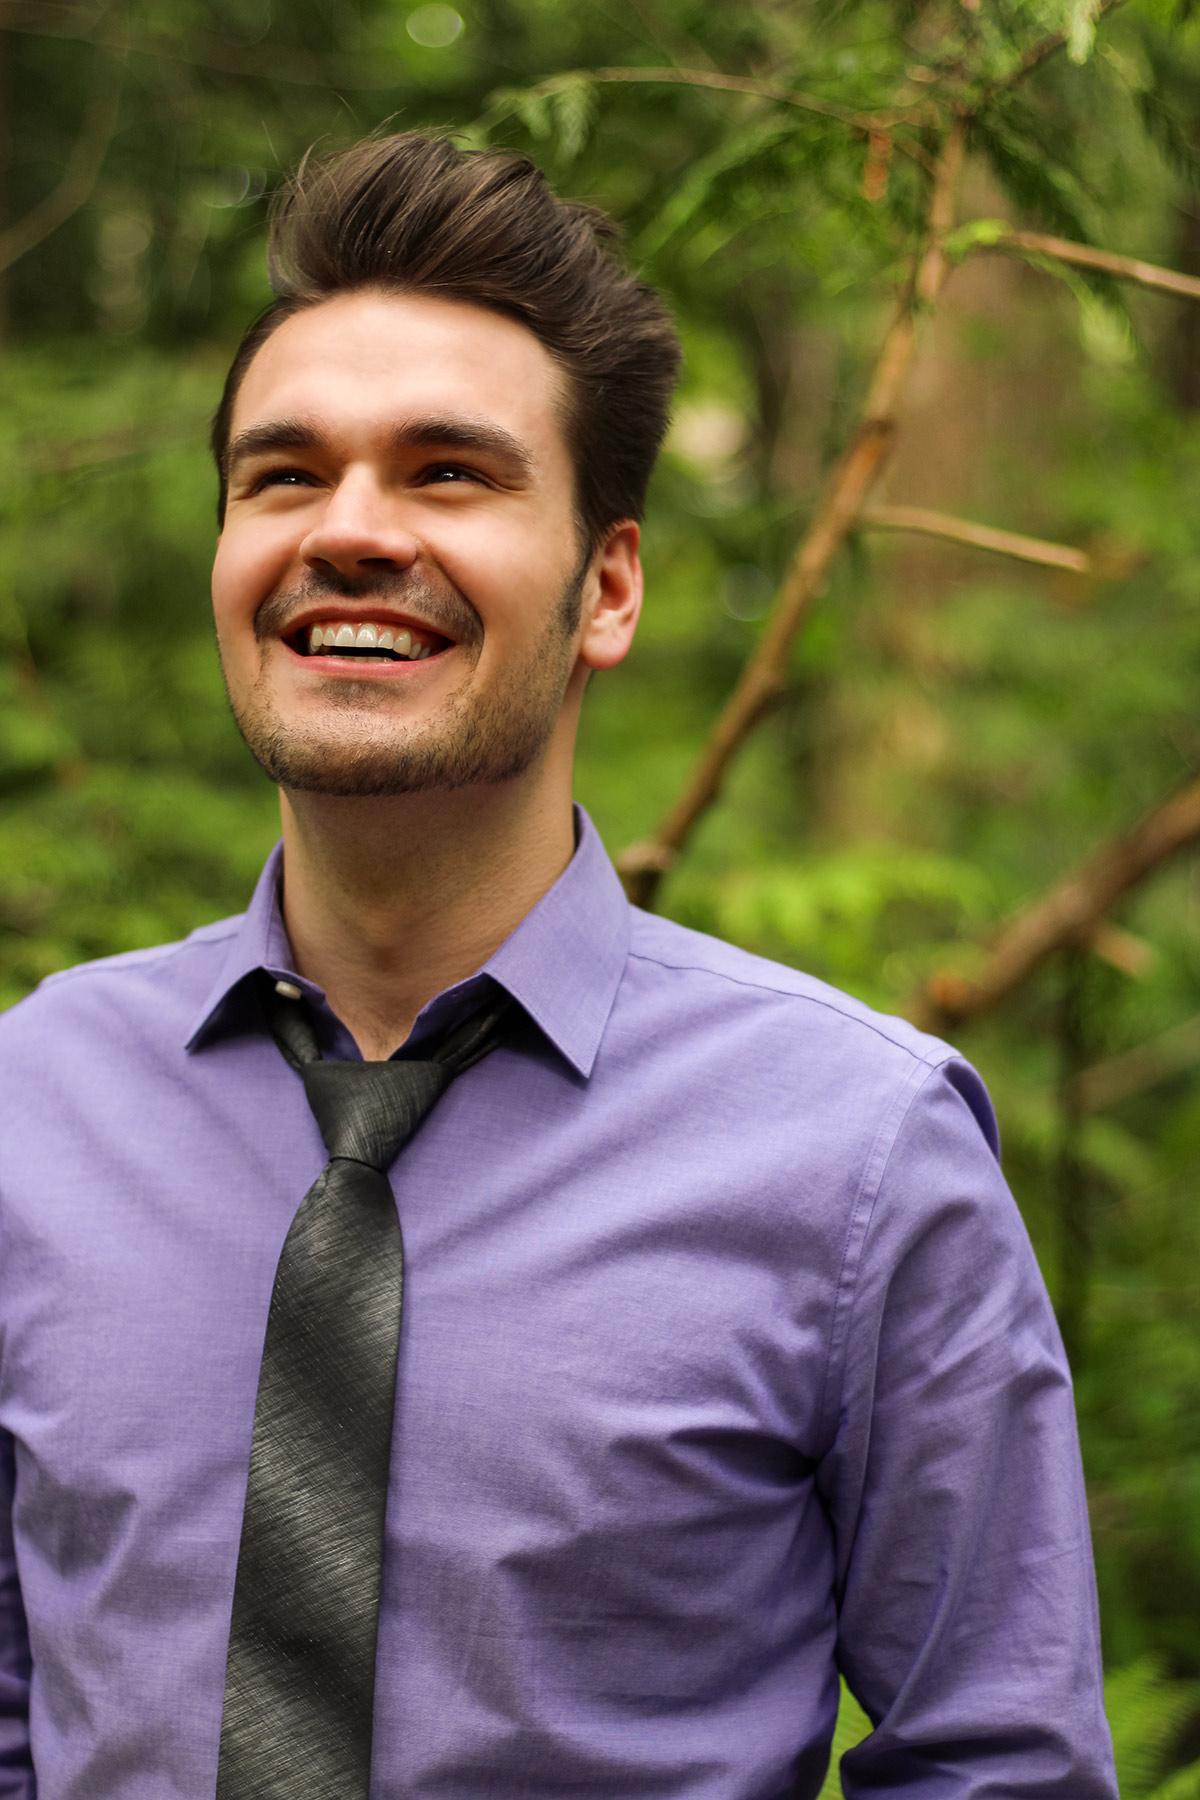 young fellow smiling broadly. Purple collared shirt, top button undone, grey necktie.